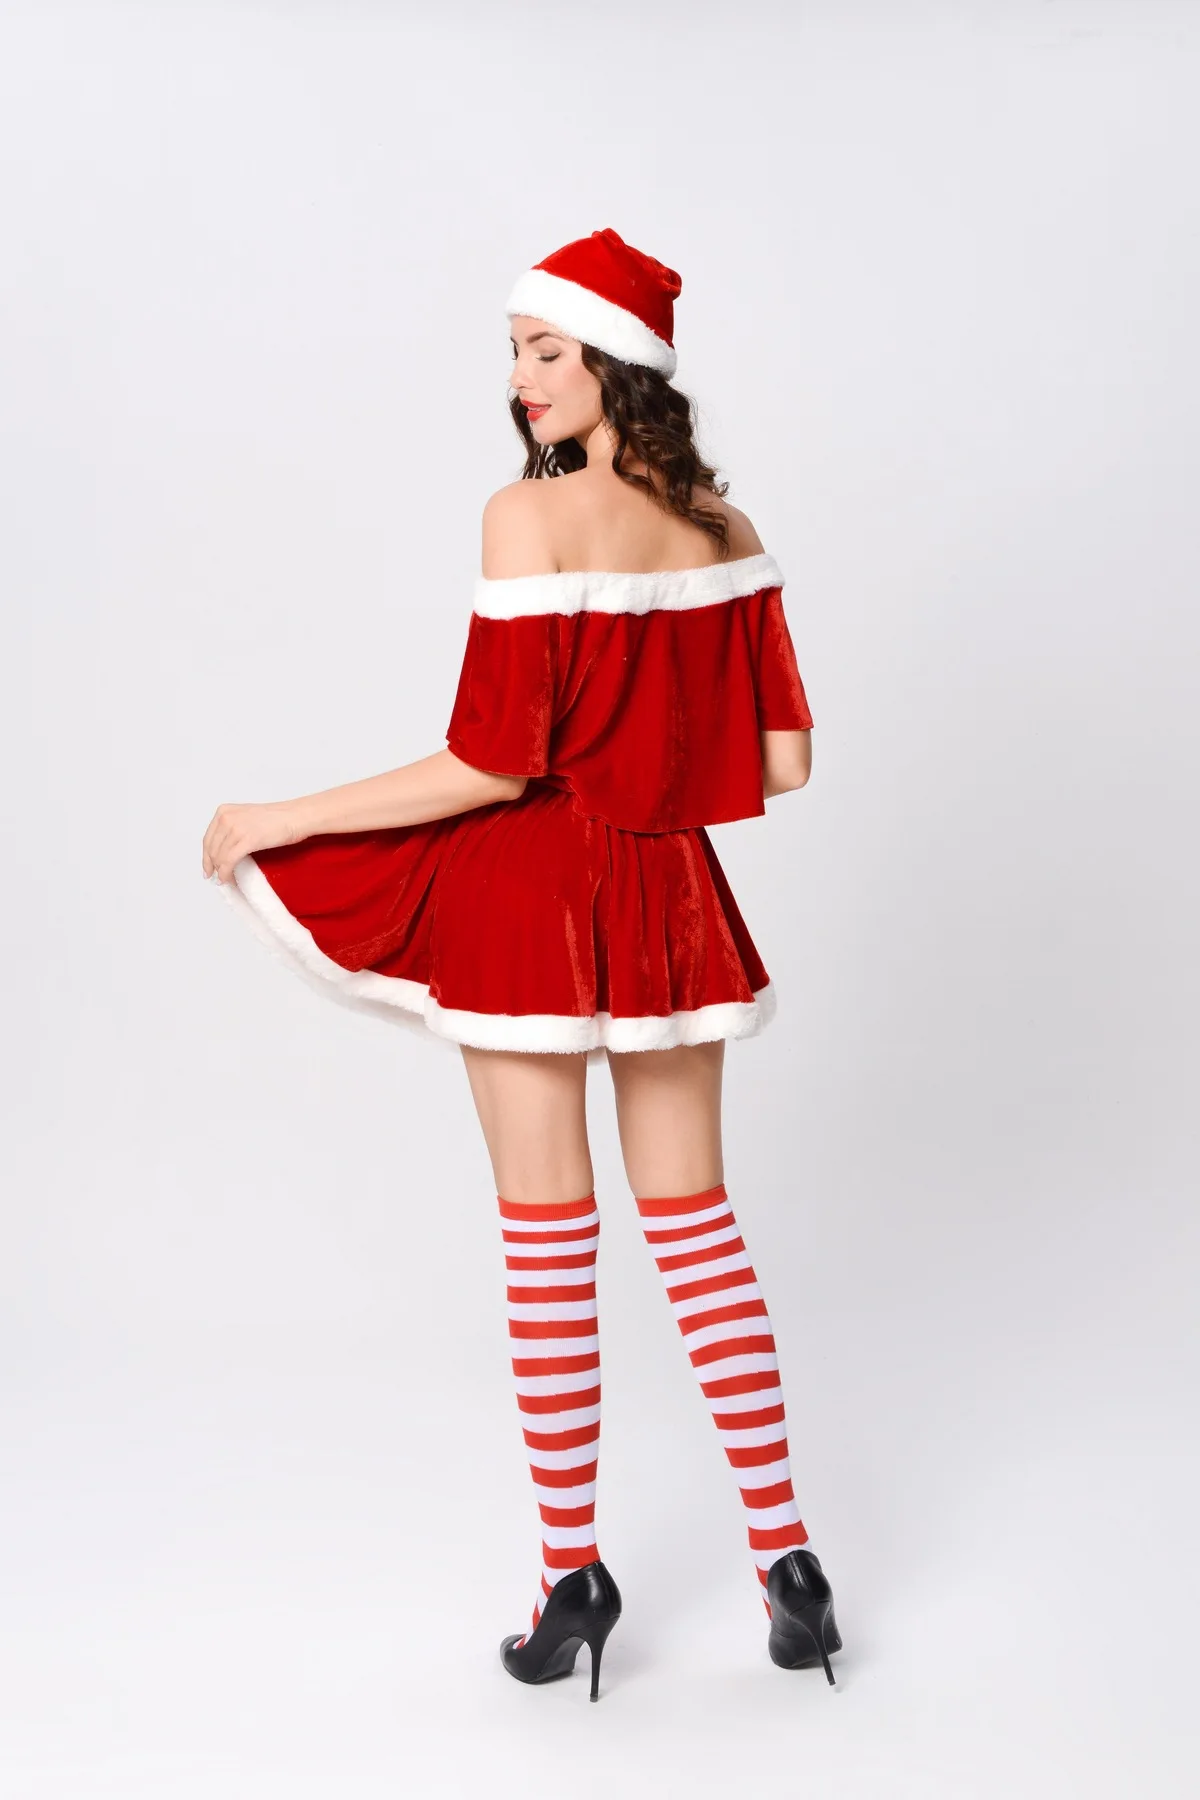 Red Velvet Sweet Santa Claus Suit Women Christmas Party Dress Cosplay Costumes Adult Sexy Halloween Costume 2021 Xmas Outfit